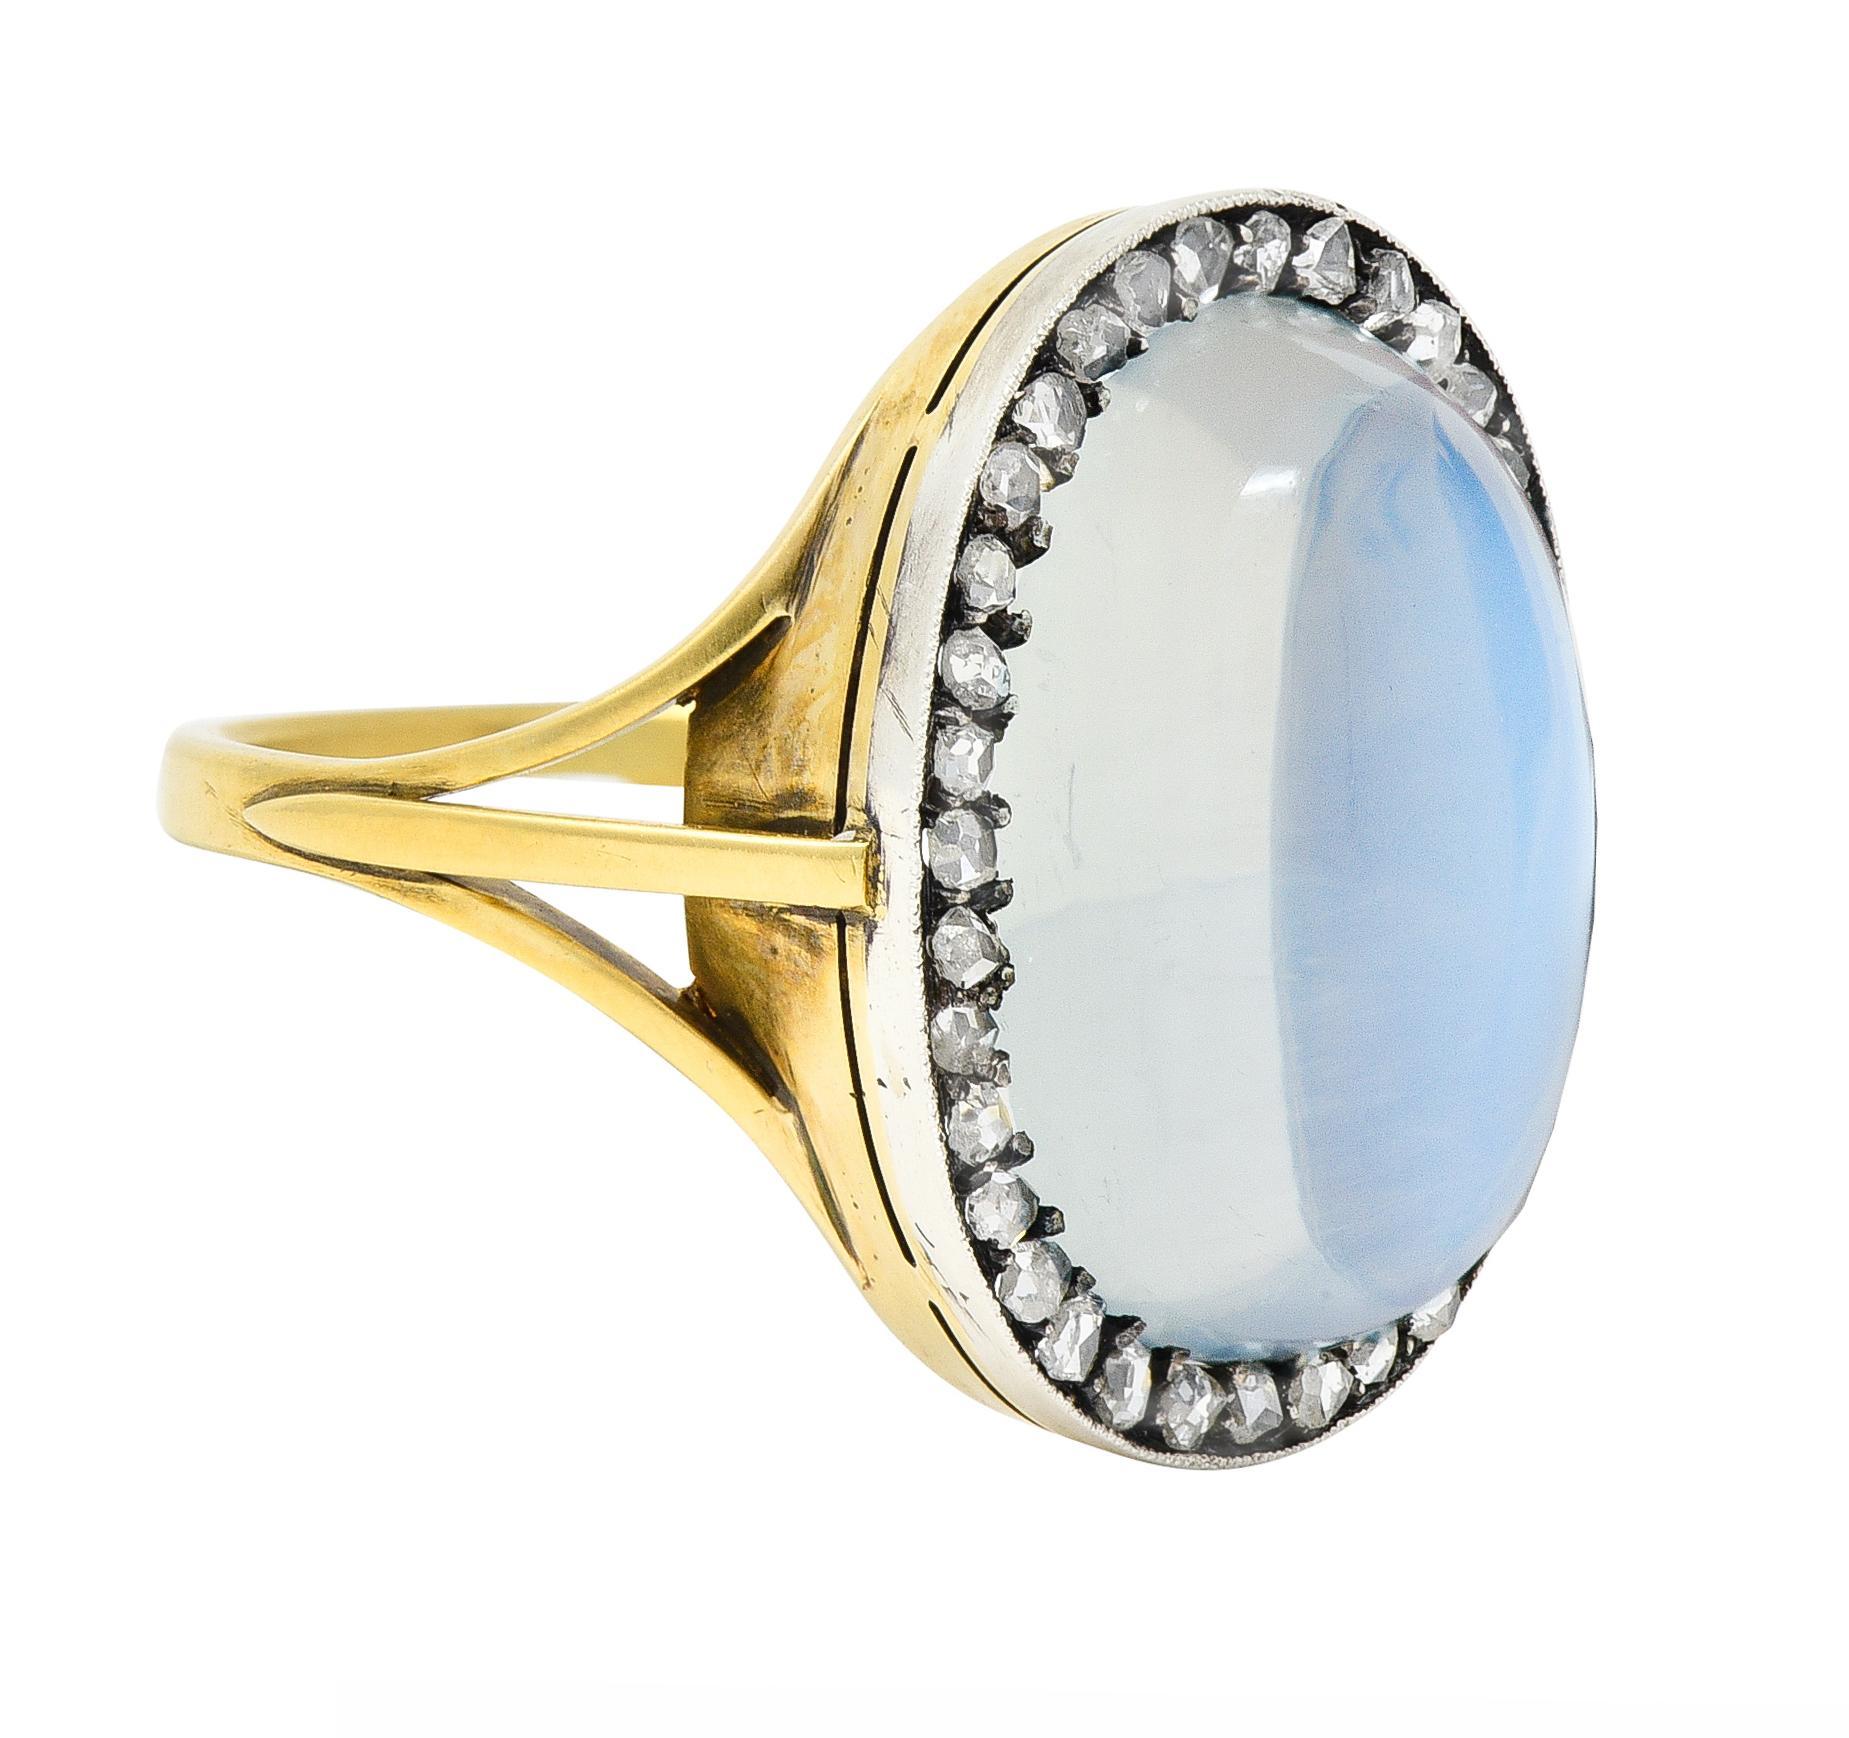 Cabochon Moonstone Diamond Silver-Topped 18 Karat Yellow Gold Antique Ring For Sale